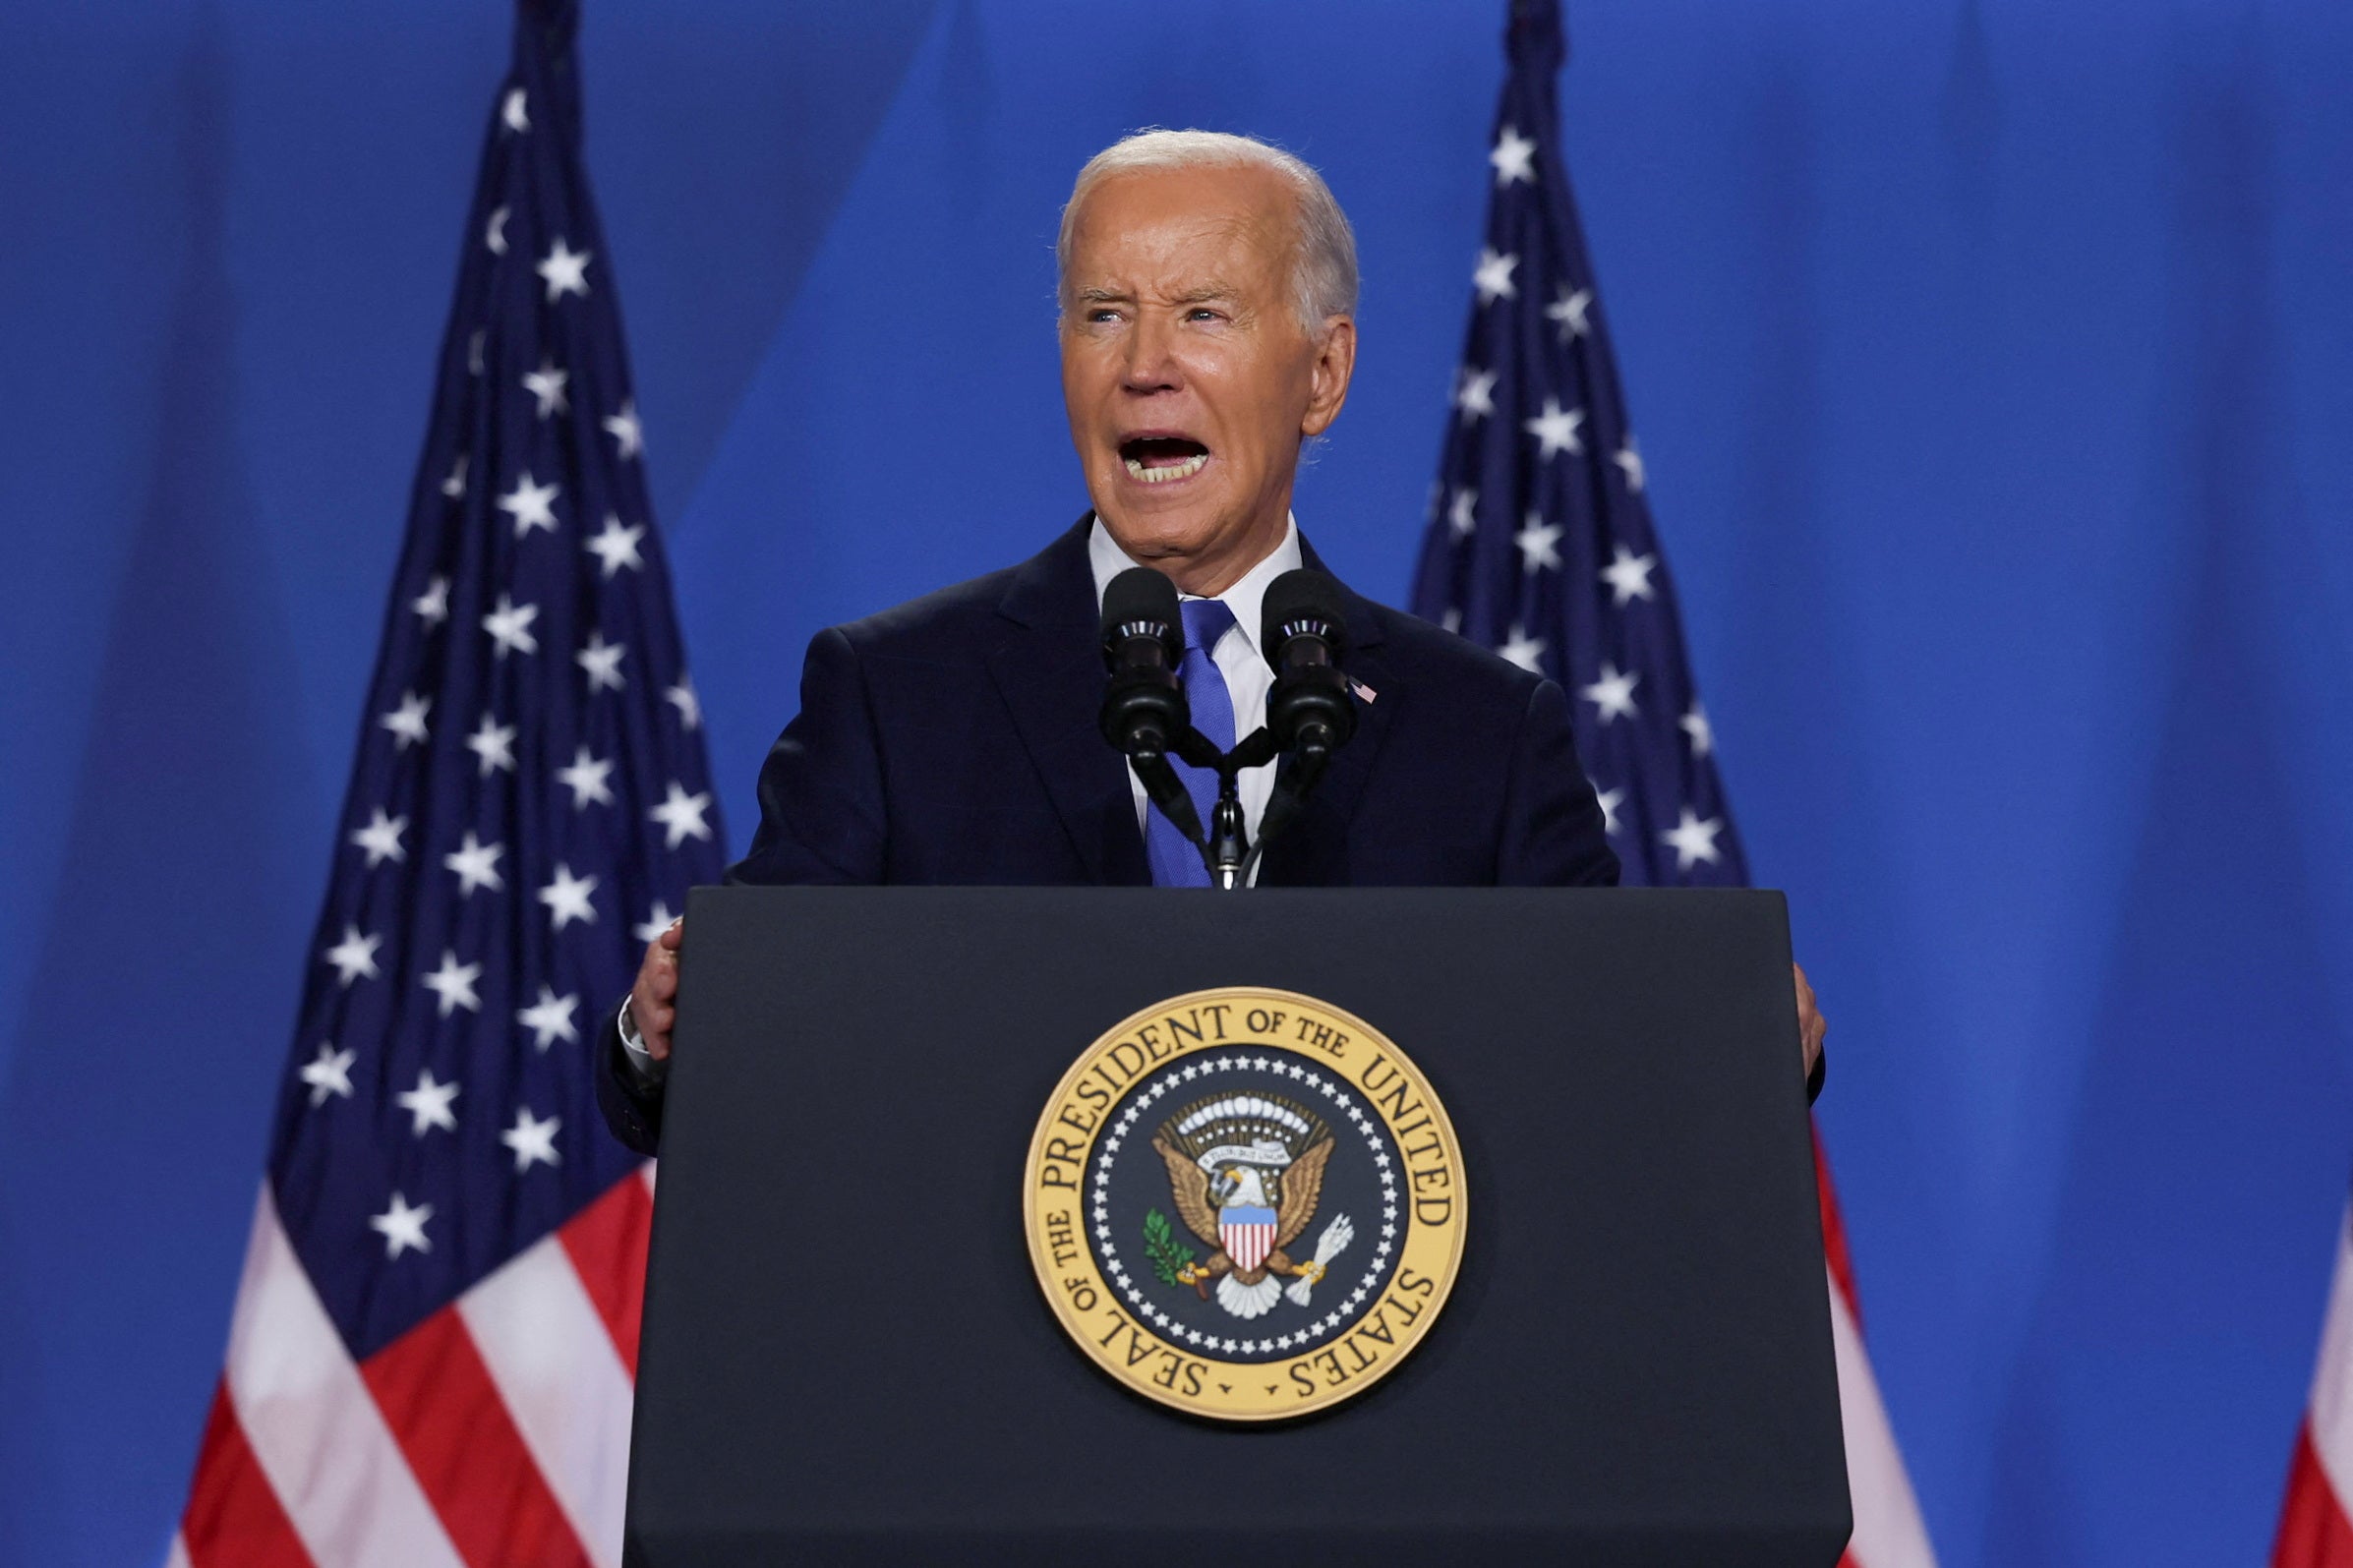 President Joe Biden holds a press conference in Washington DC on July 11 during a NATO summit recognizing the alliance’s 75th annivery.